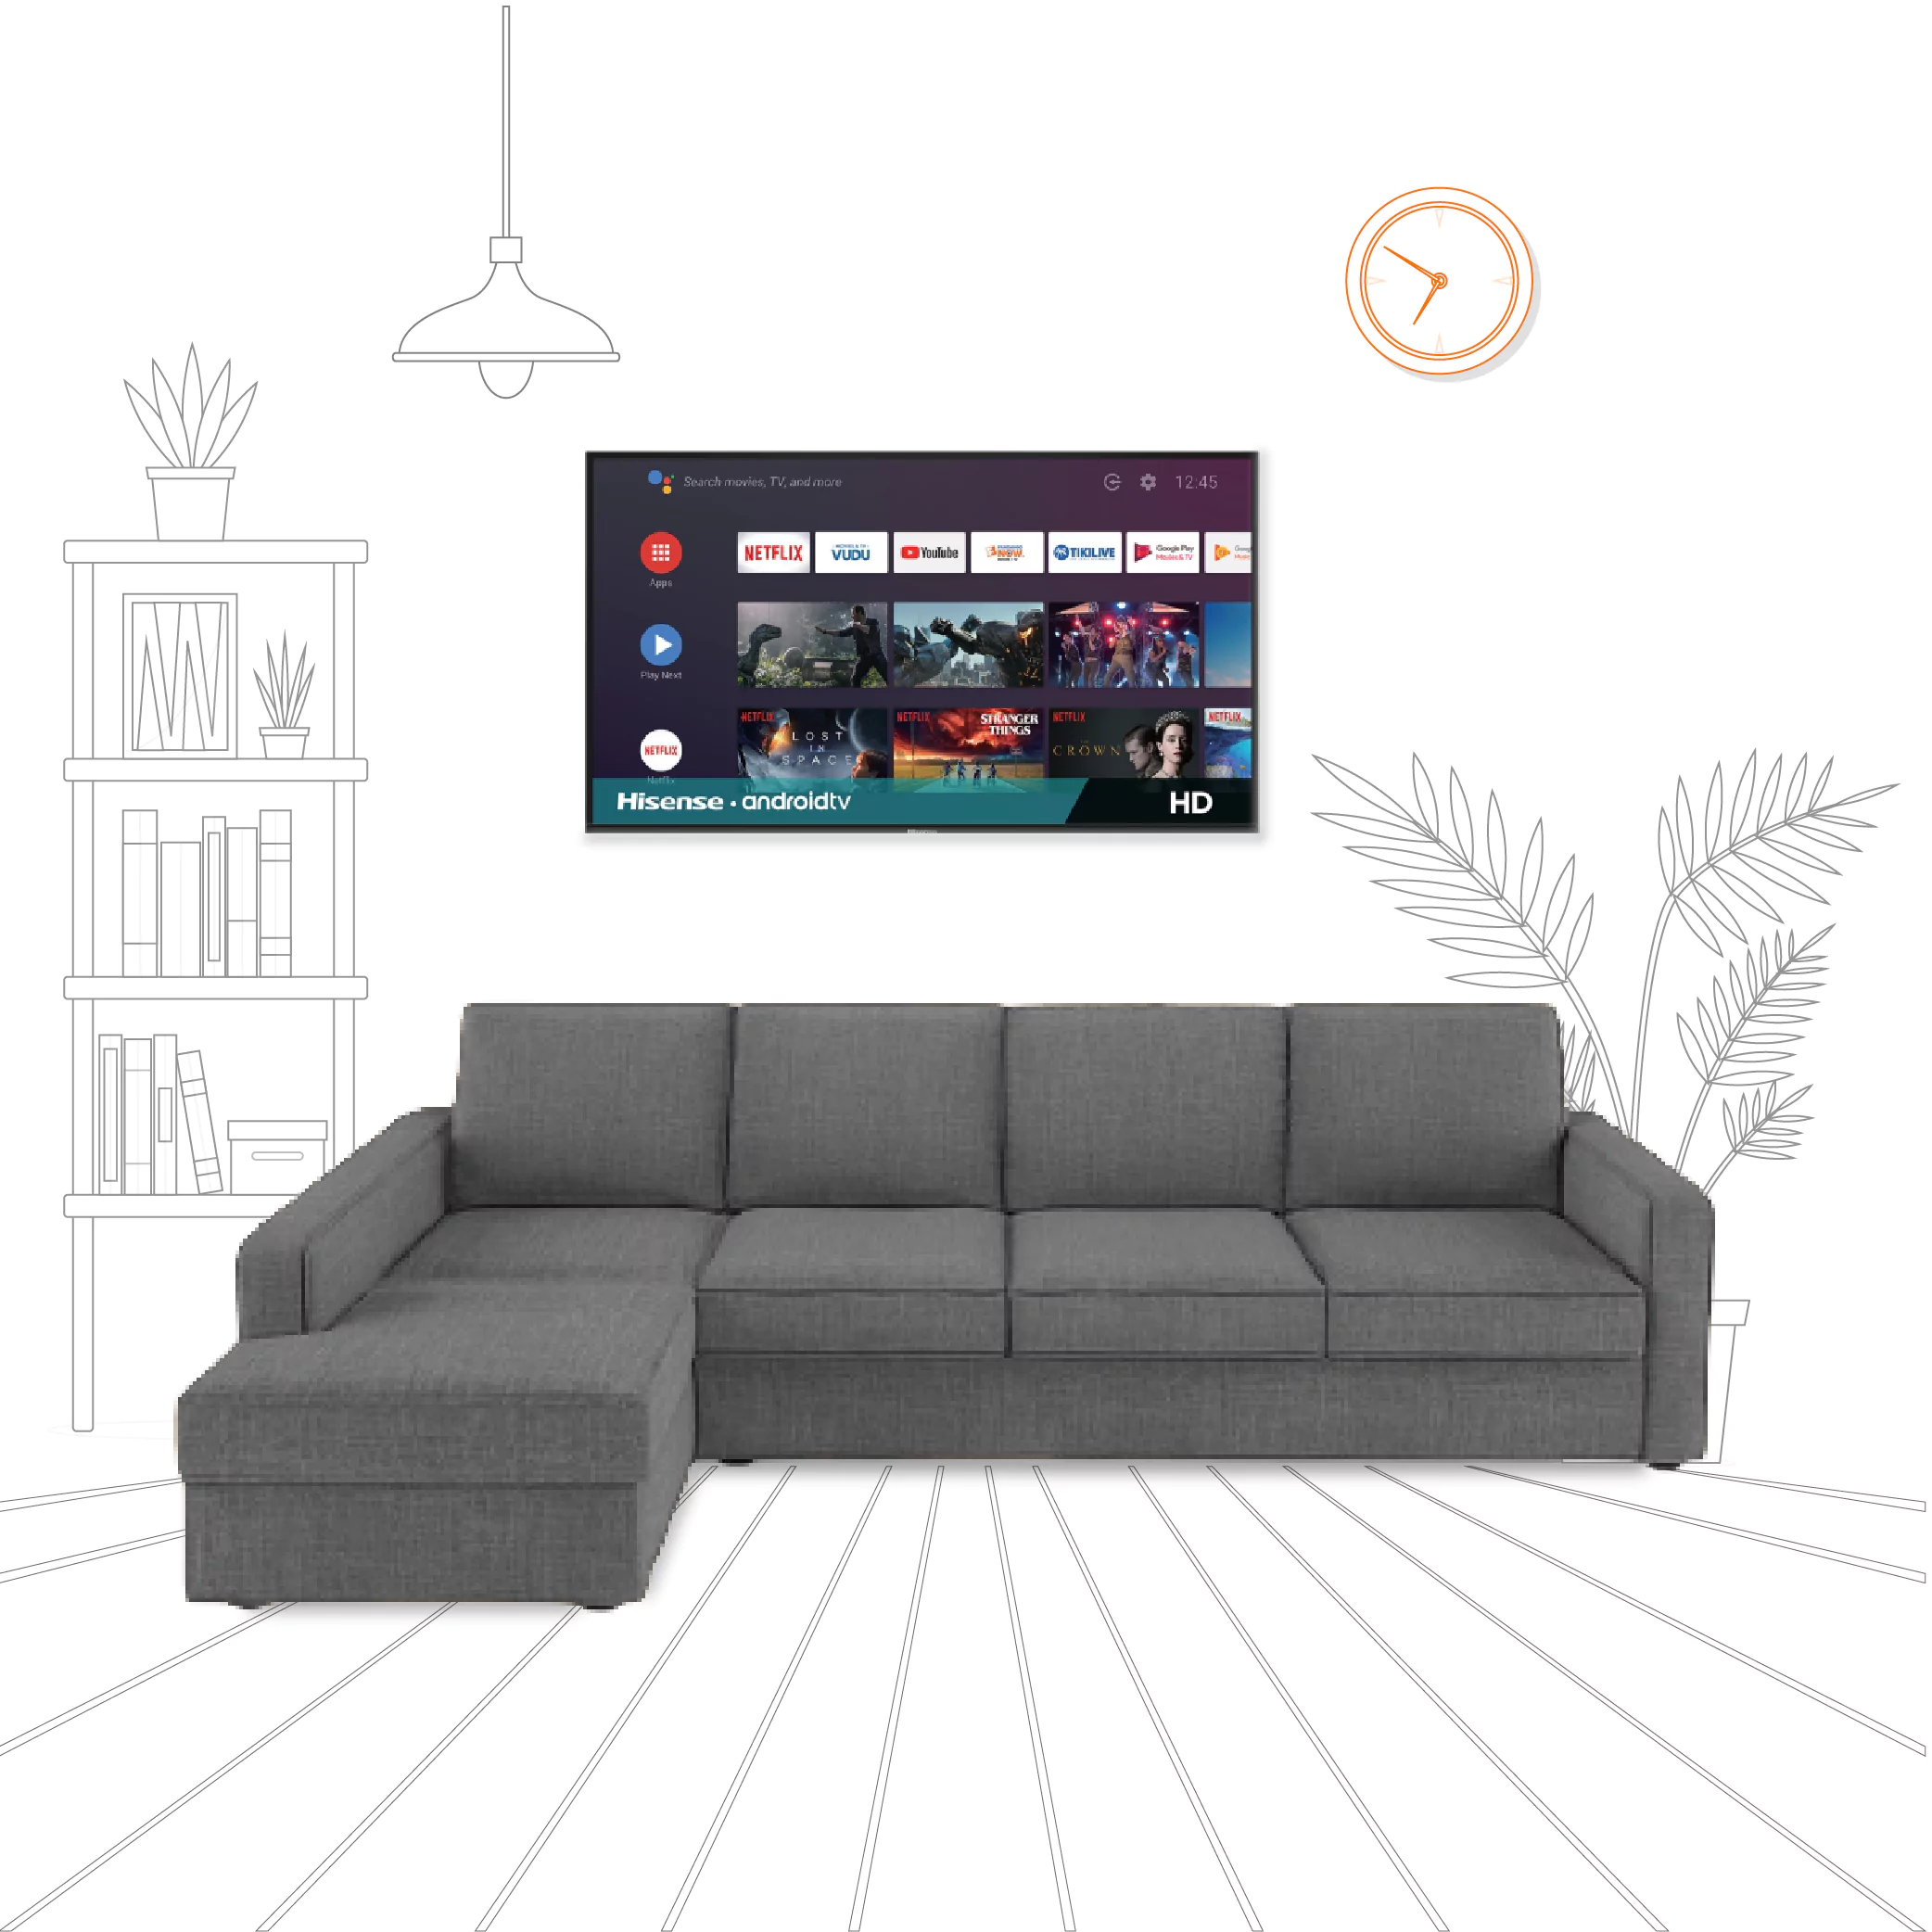 Combo-11- Klassik Grey L Shape Sofa (5 Seater - right )  by Elitrus + TV 43 inches - Smart Android